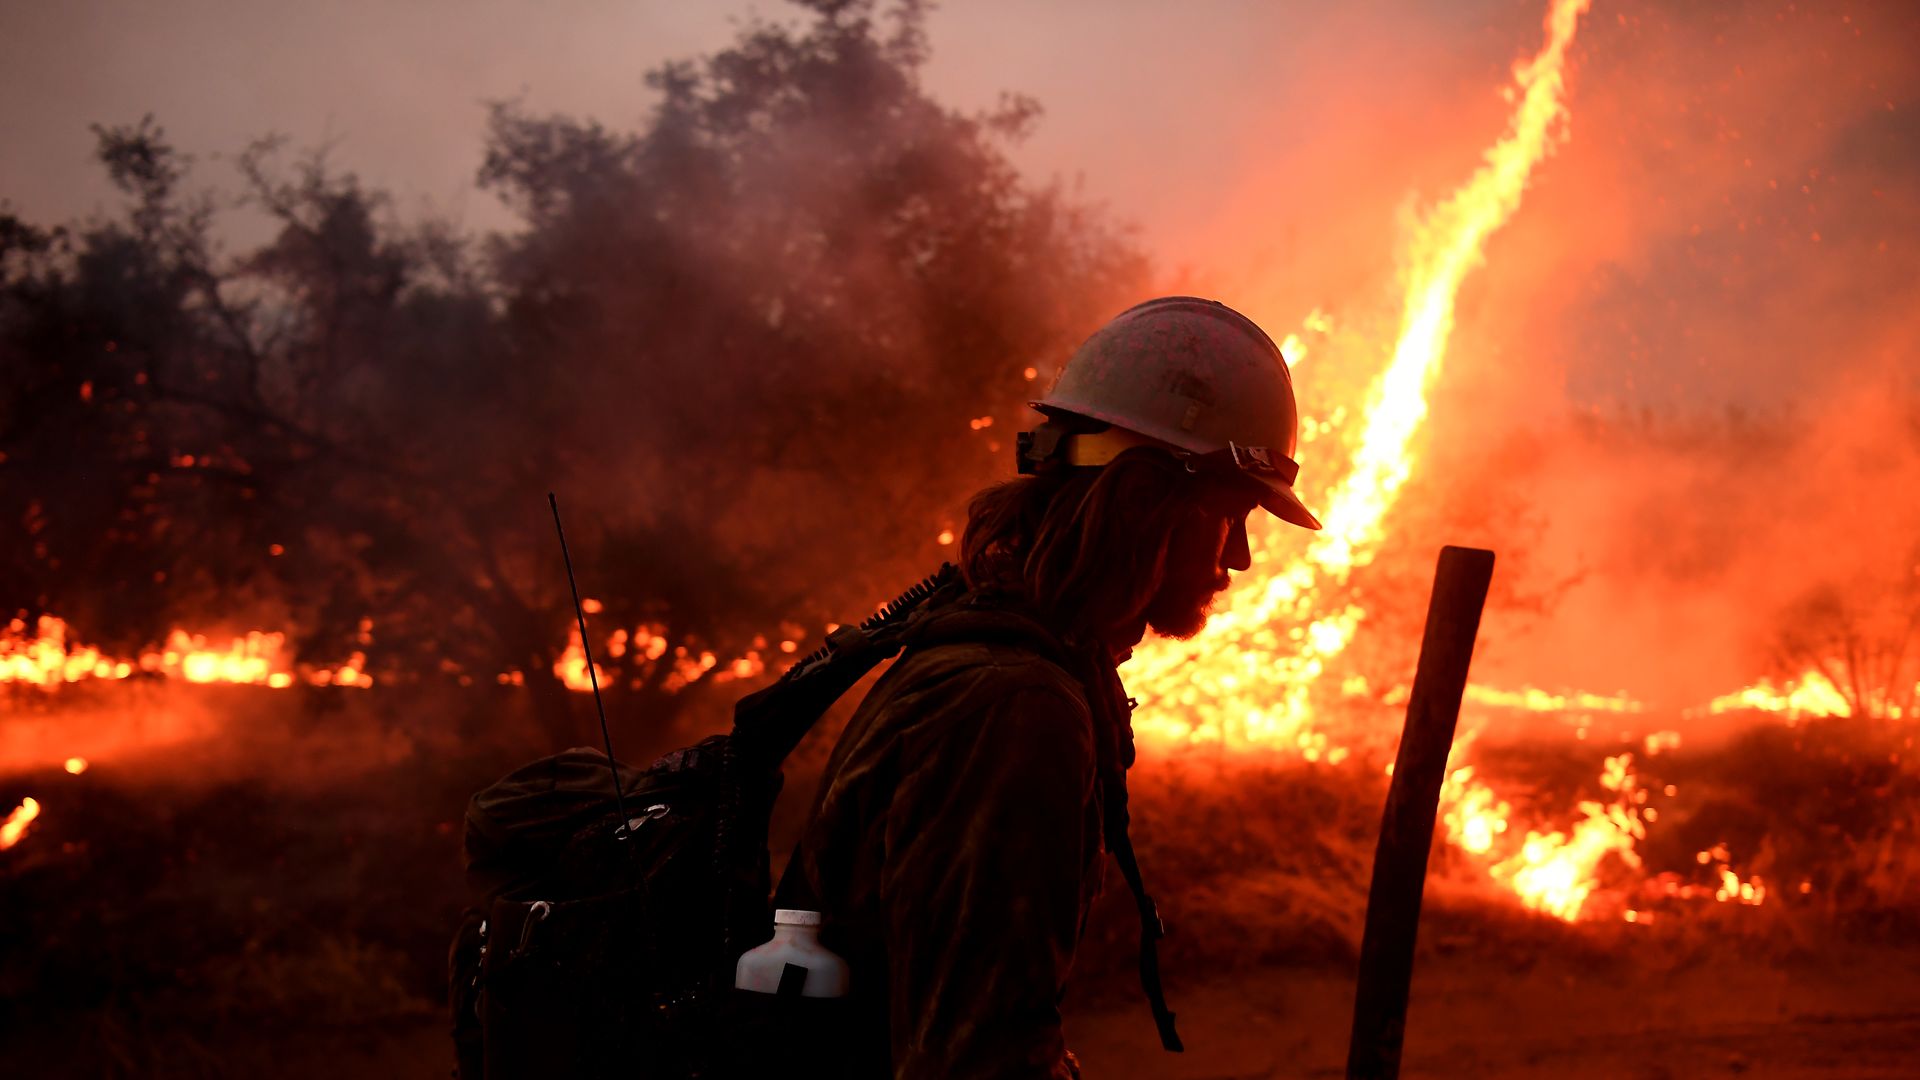 A firefighter helps to set bck fires as the El dorado Fire approaches in Tucaipa, California, in September.